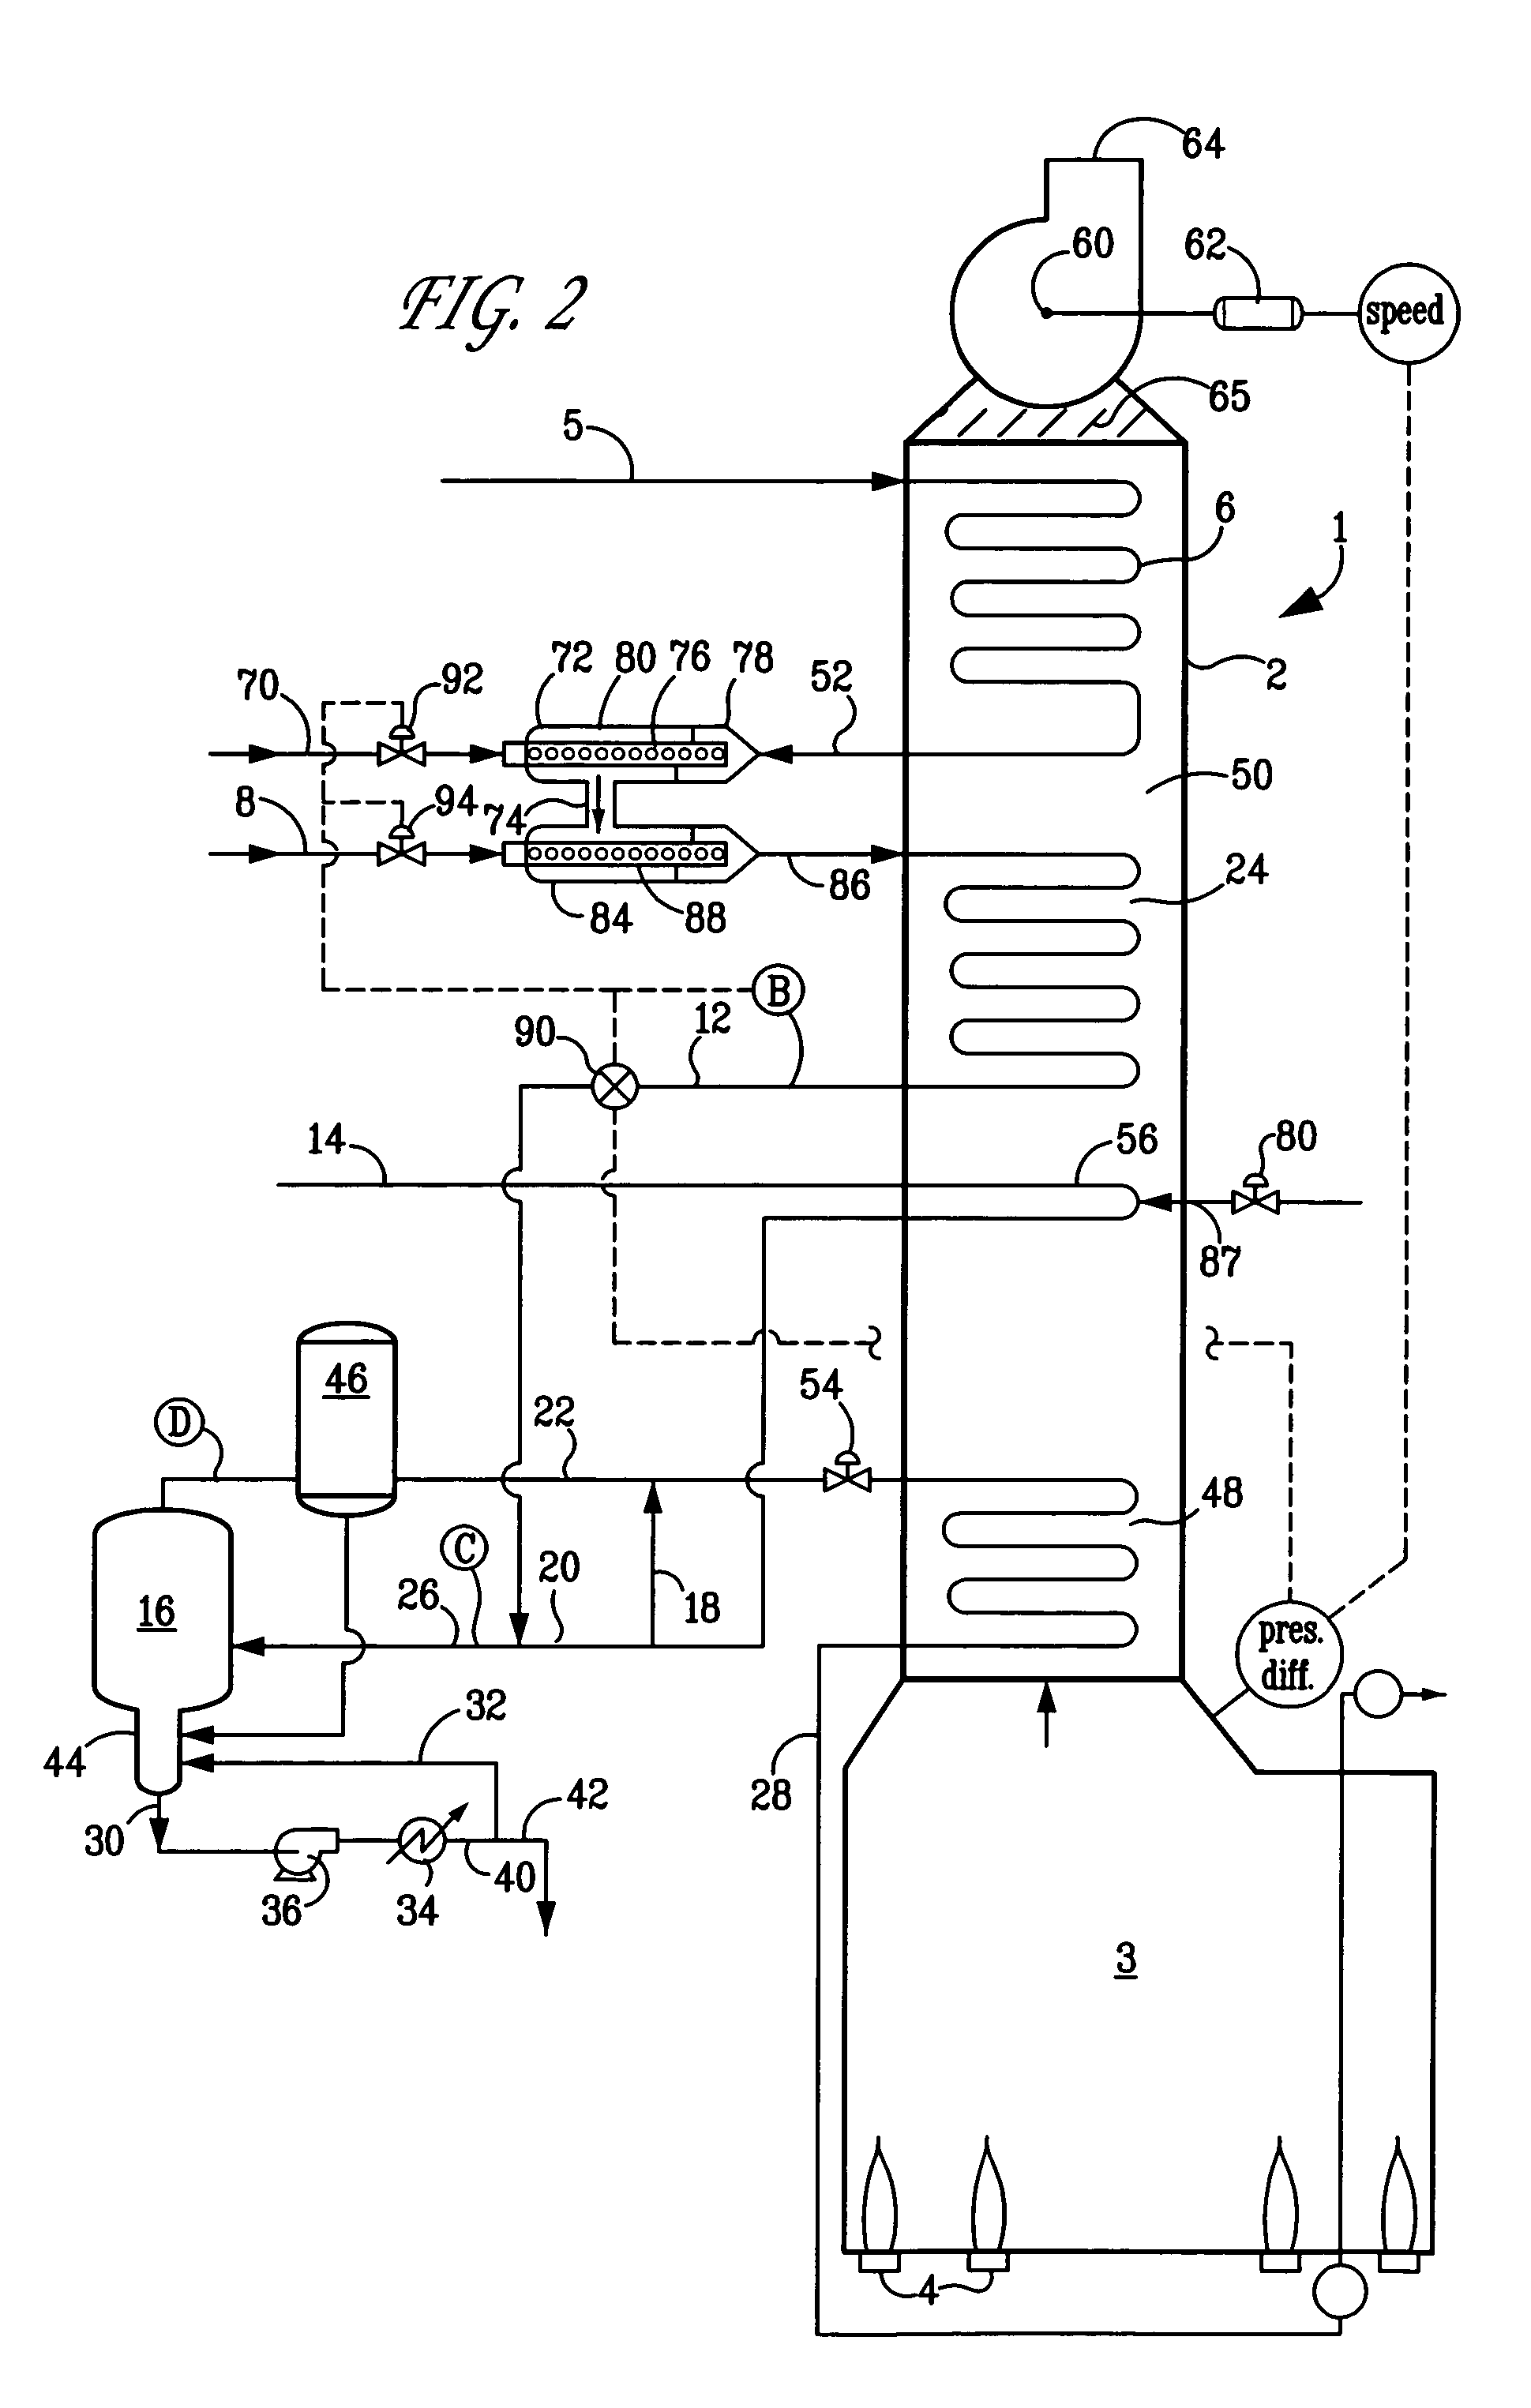 Process and draft control system for use in cracking a heavy hydrocarbon feedstock in a pyrolysis furnace